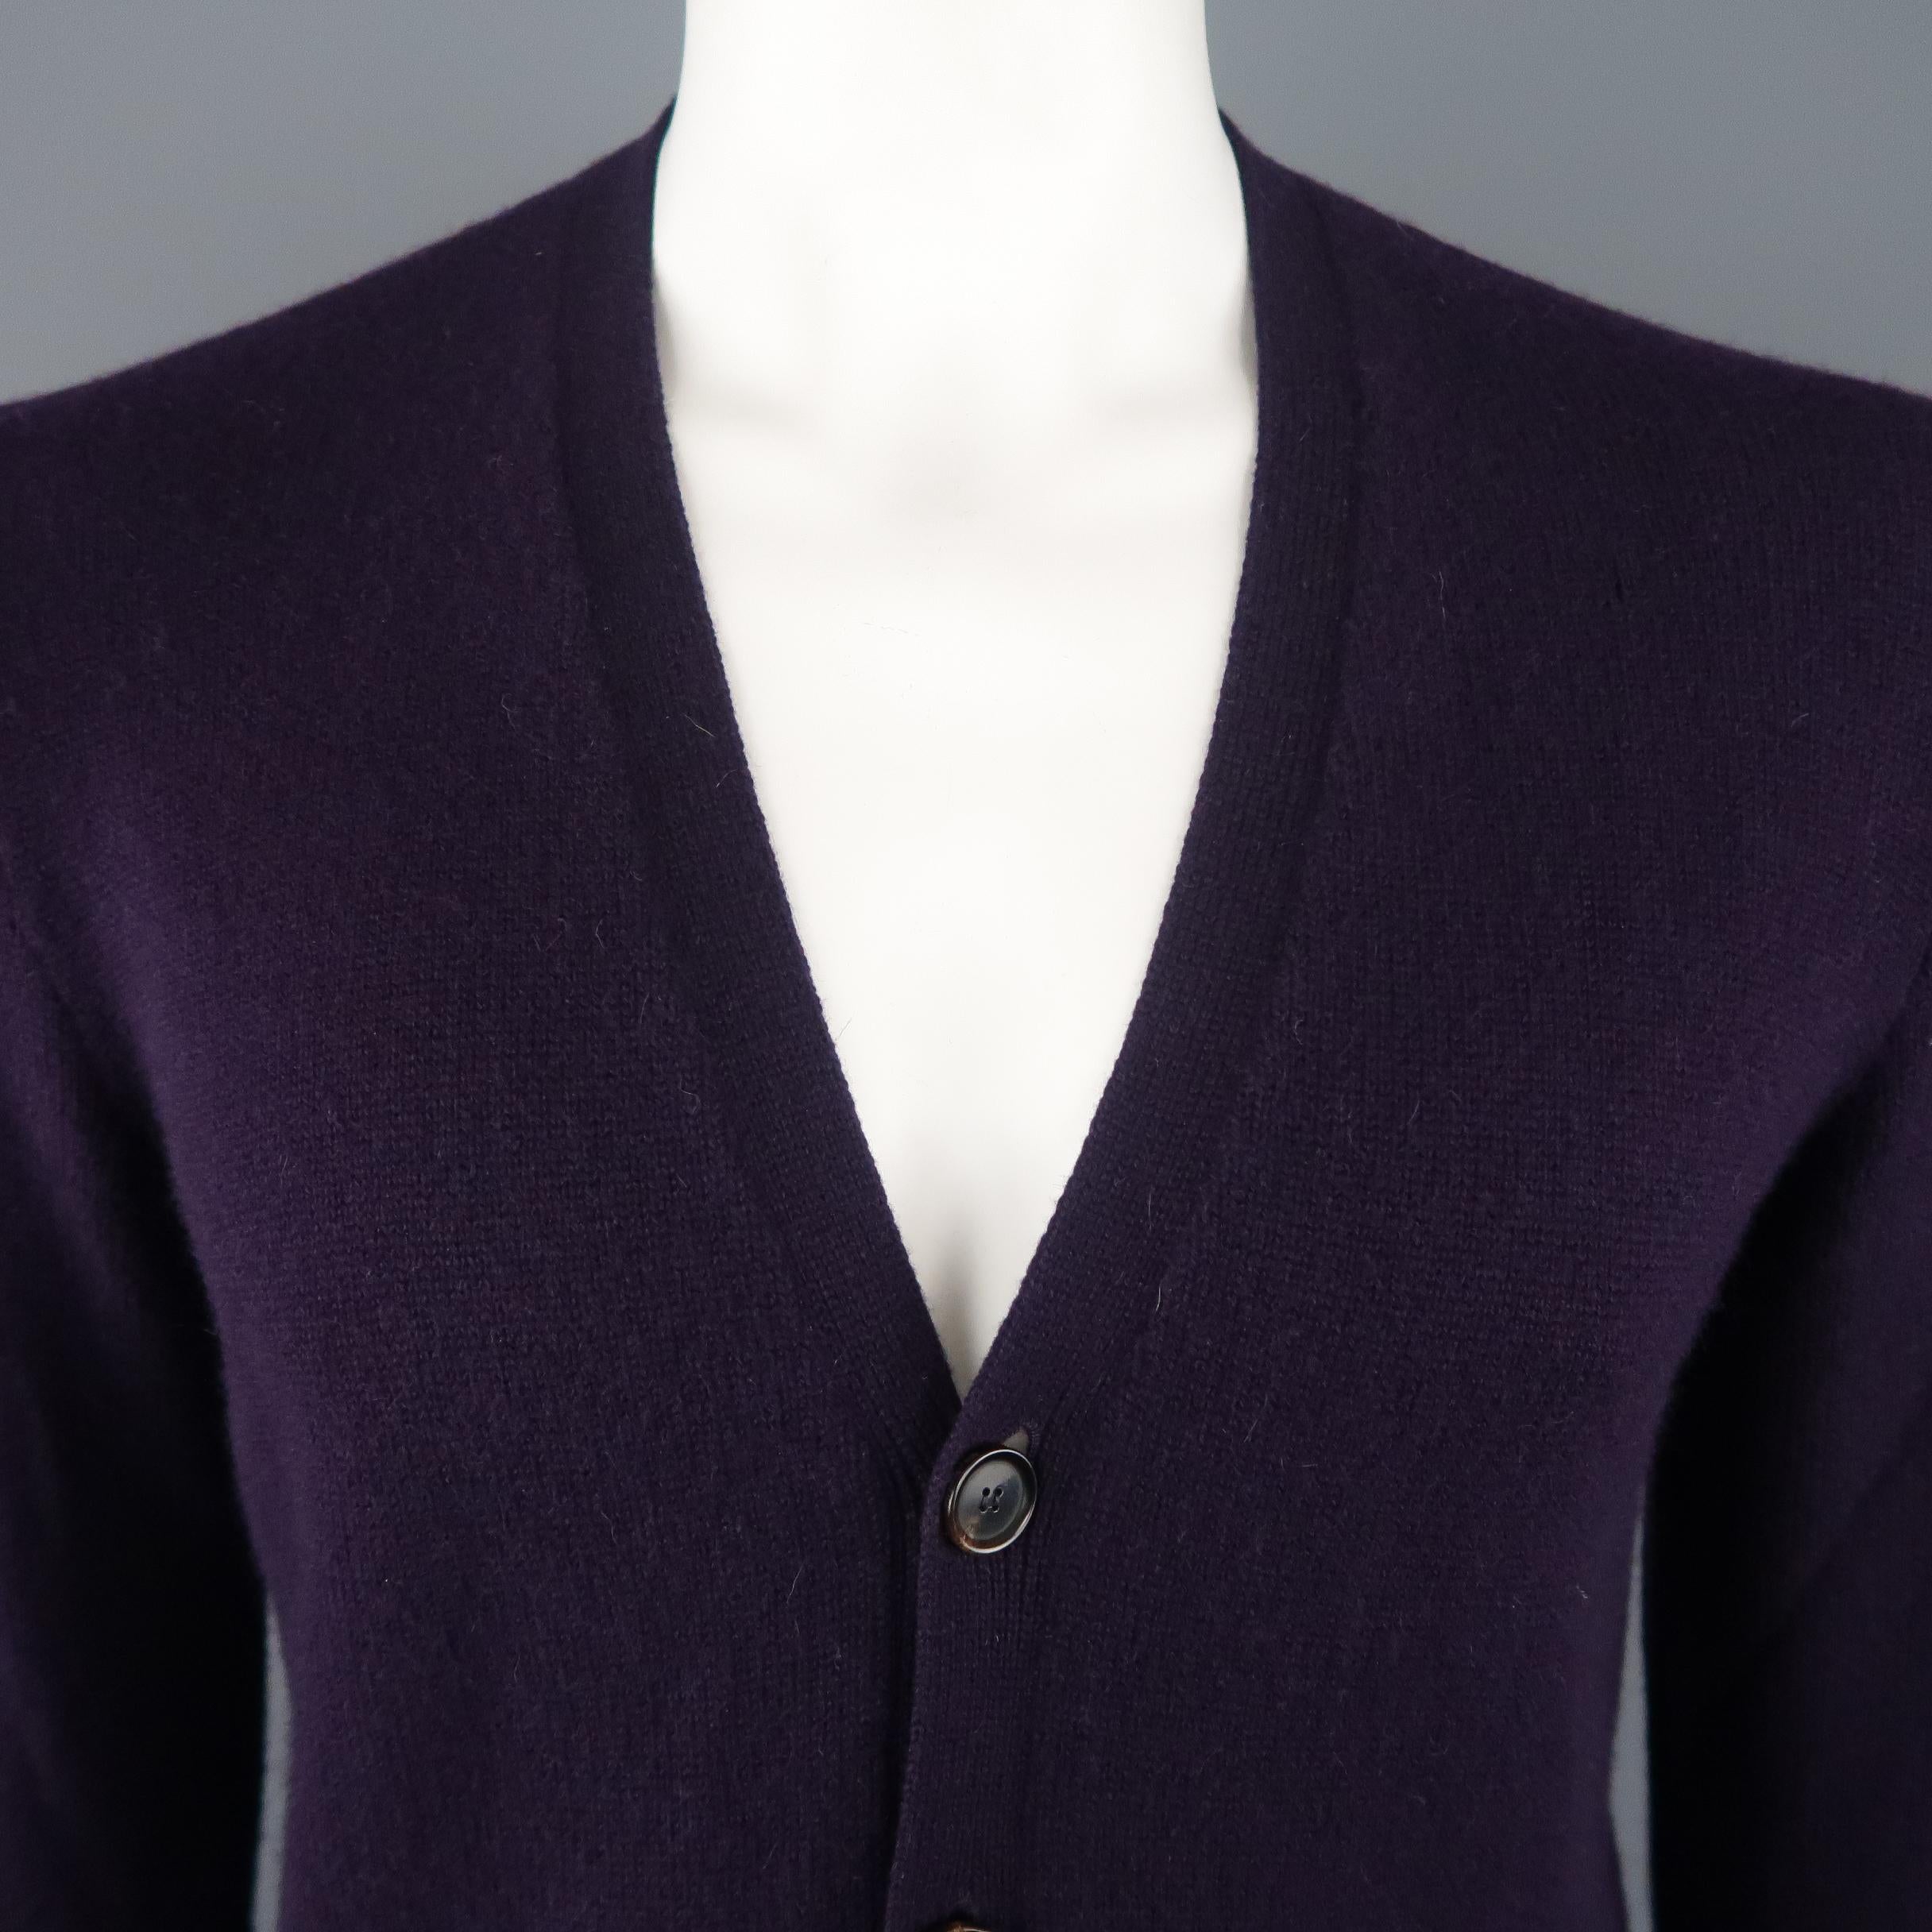 RALPH LAUREN PURPLE LABEL Cardigan Sweater comes in a eggplant tone in a knitted cashmere material, with 4 buttons at closure, slit pockets and ribbed cuffs and hem. Made in Italy.
 
Excellent Pre-Owned Condition.
Marked: M
 
Measurements:
